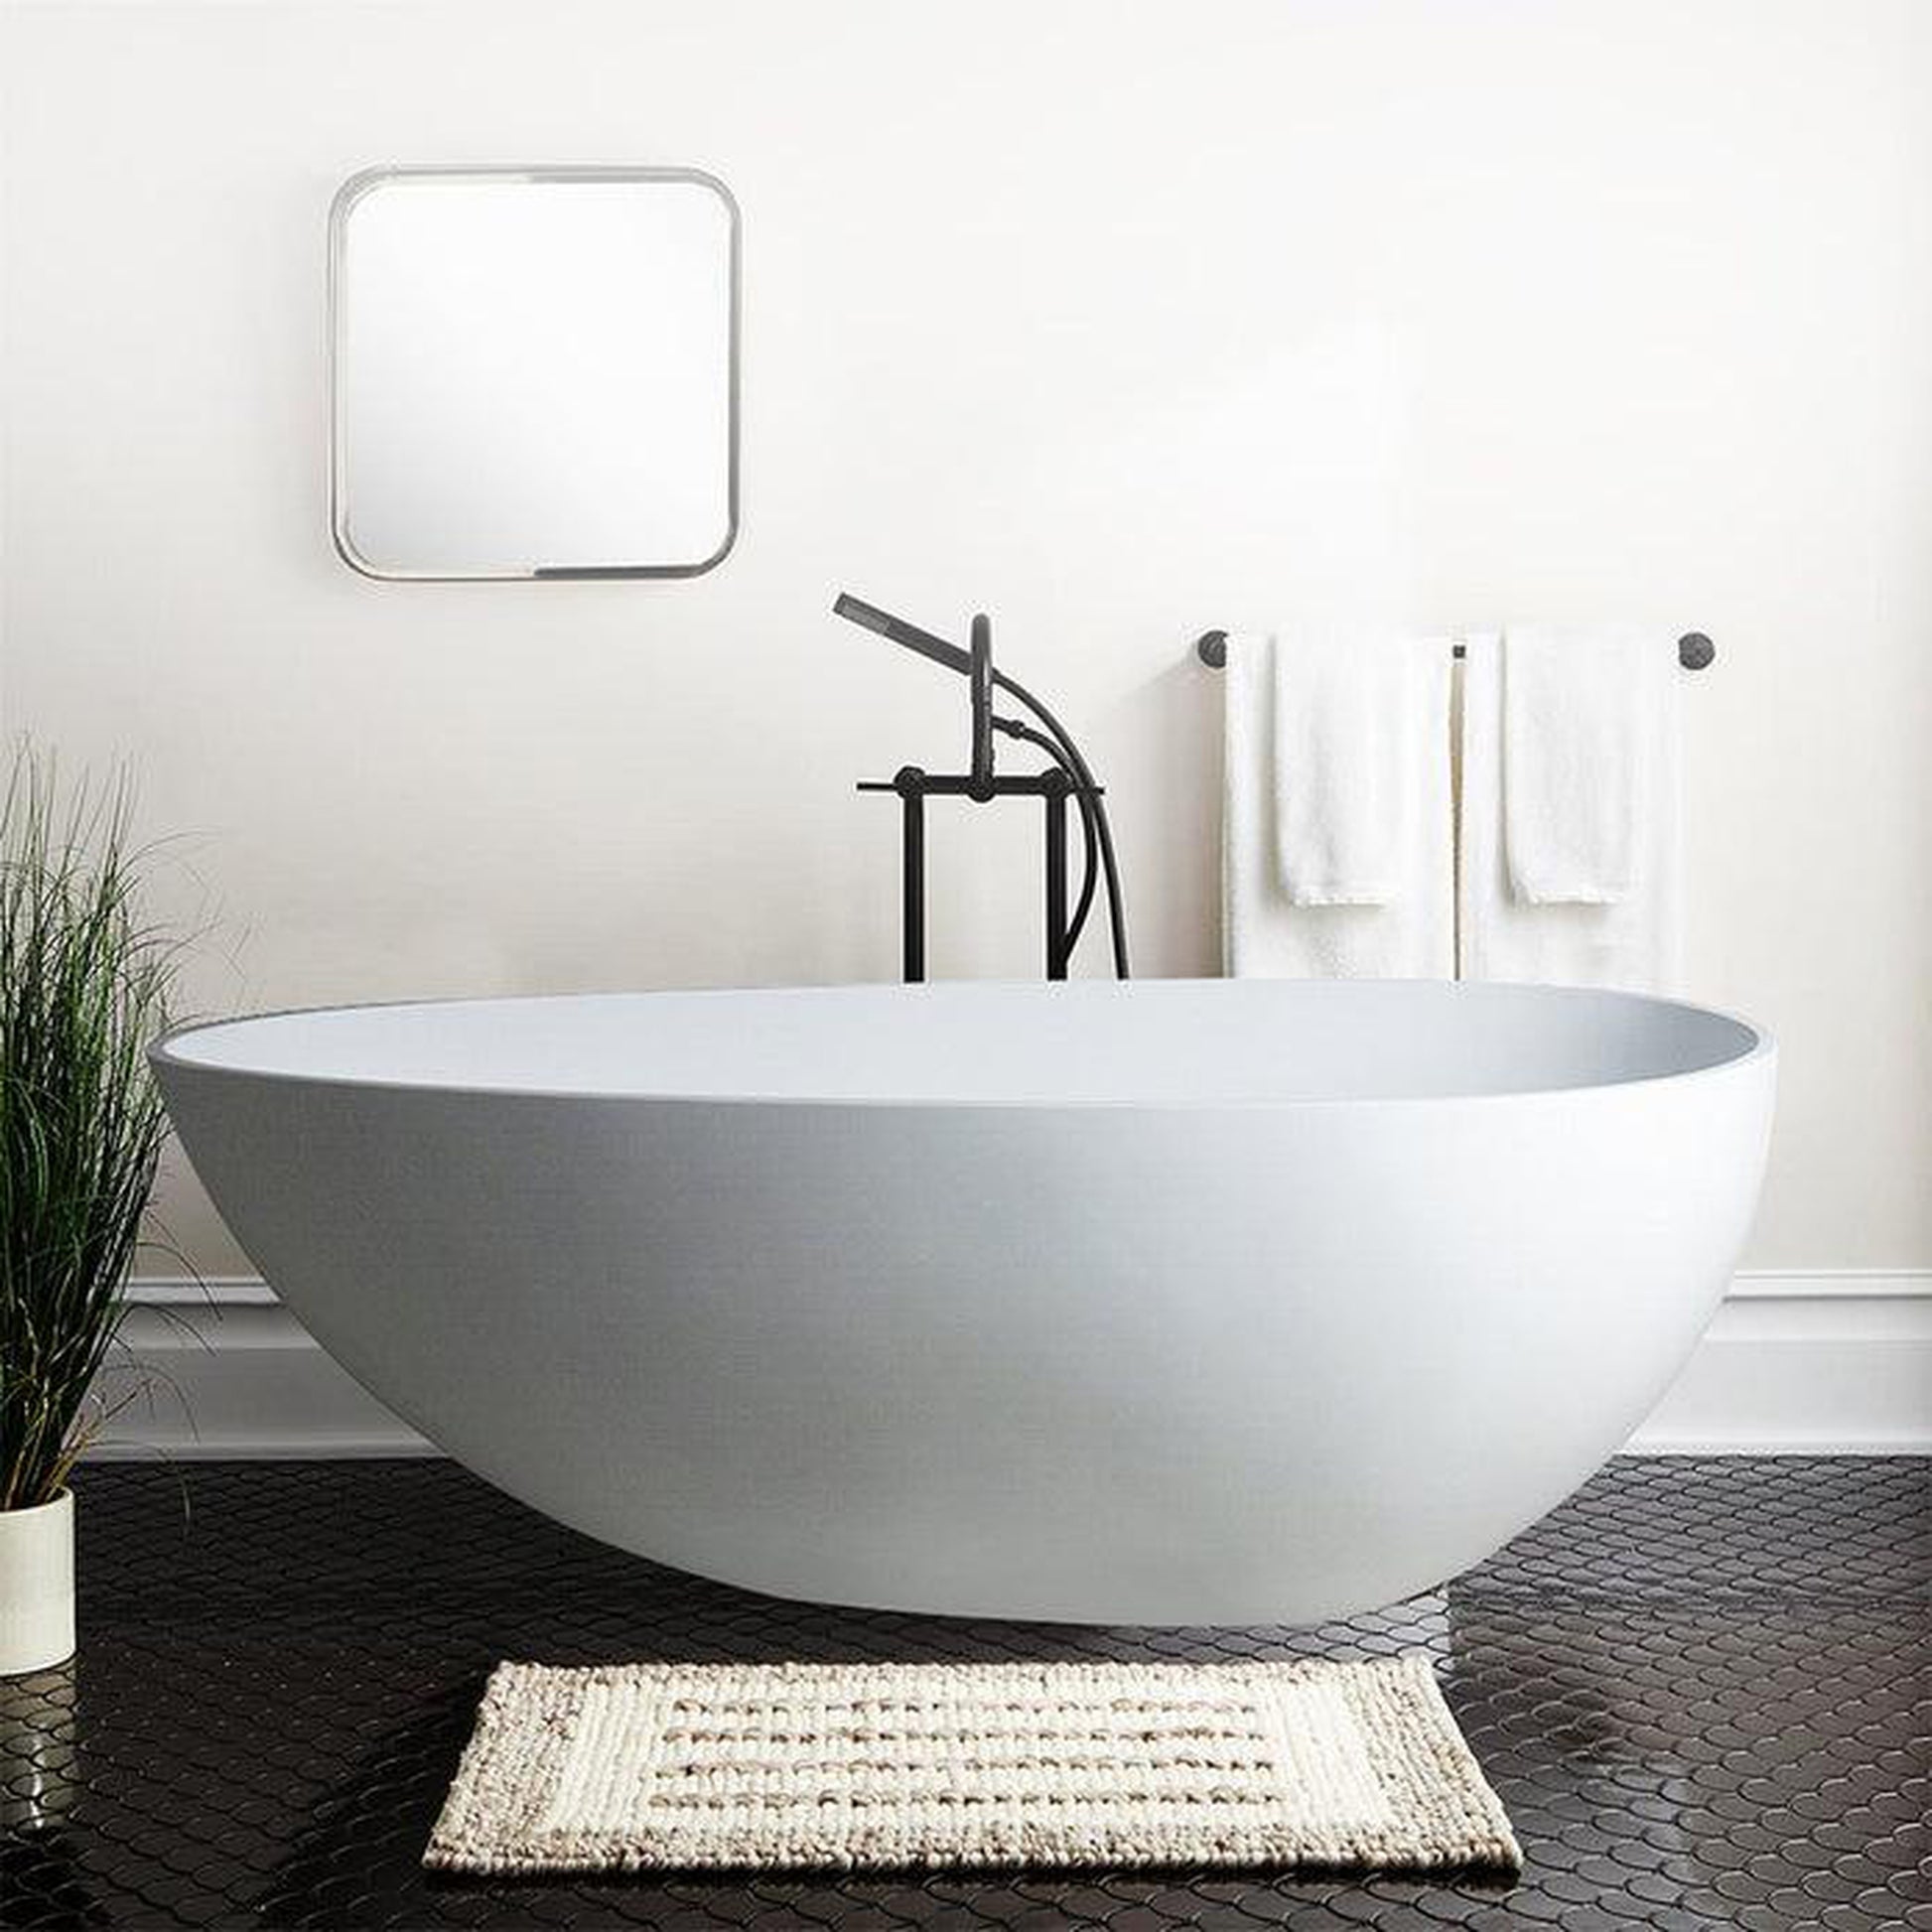 Vanity Art 67" Matte White Contemporary Design Soaking Tub With Overflow and Pop-up Drain